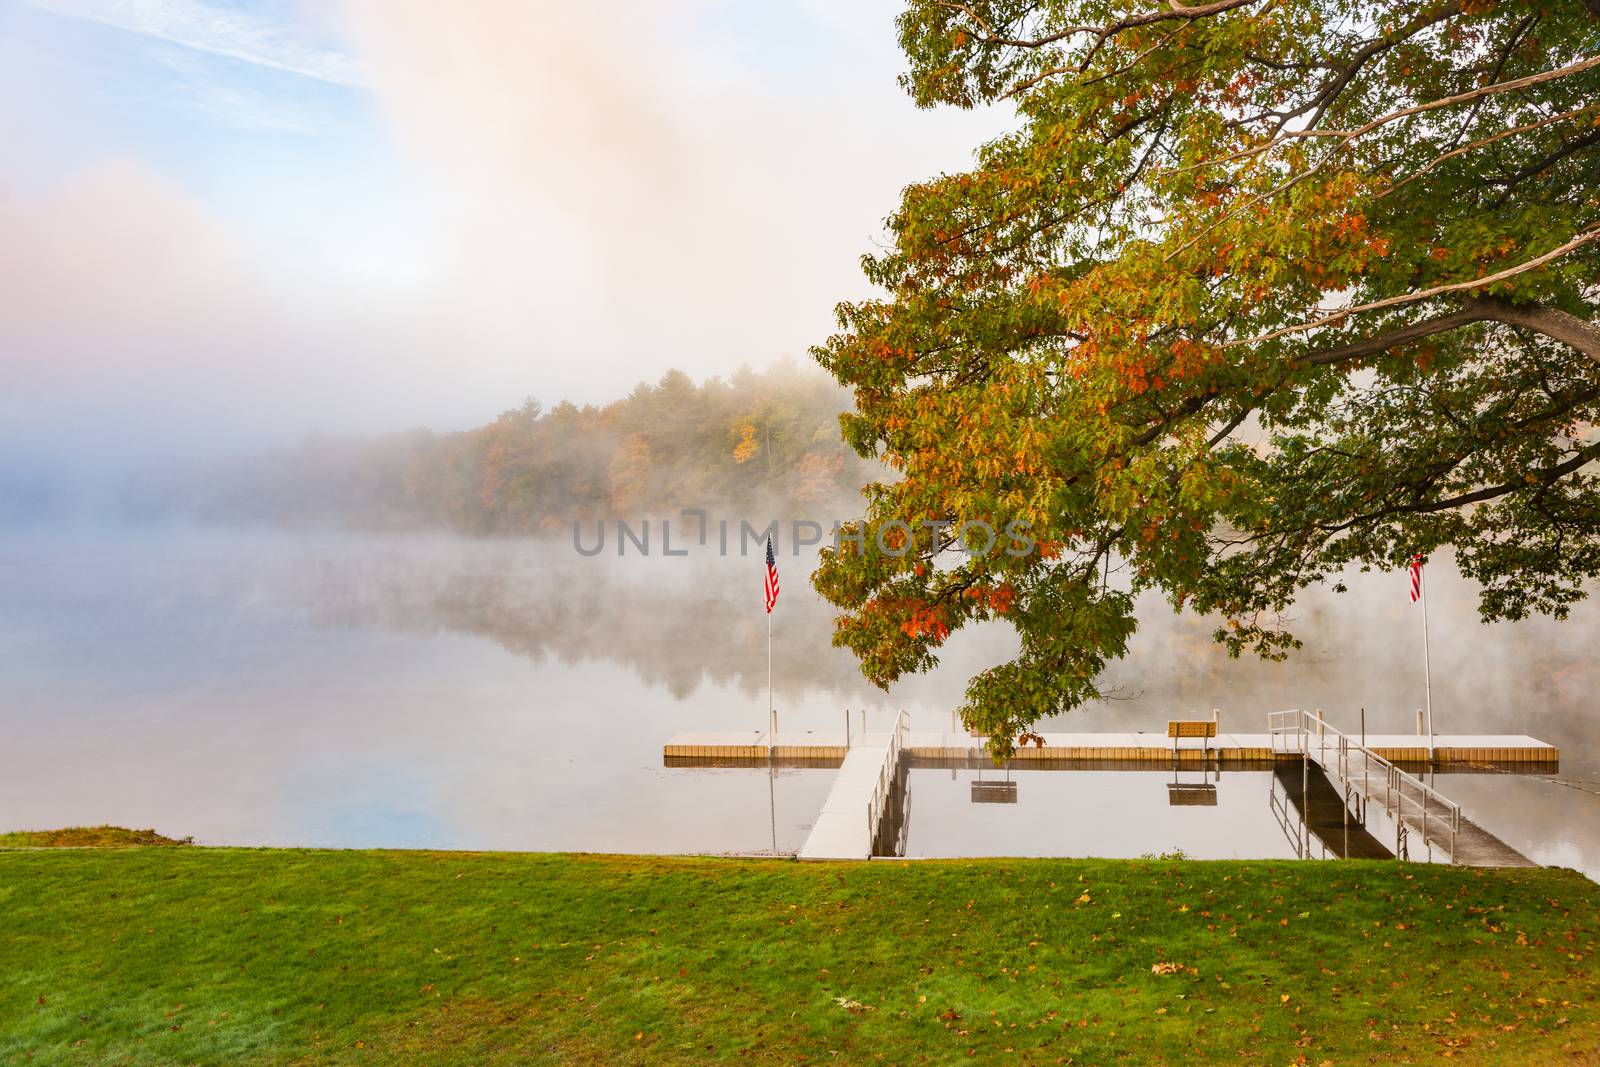 Scenic river edge and T-shaped pier under oak tree early morning fog just above the water level of Connecticut River with colorful fall foliage along both sides converging into distance.